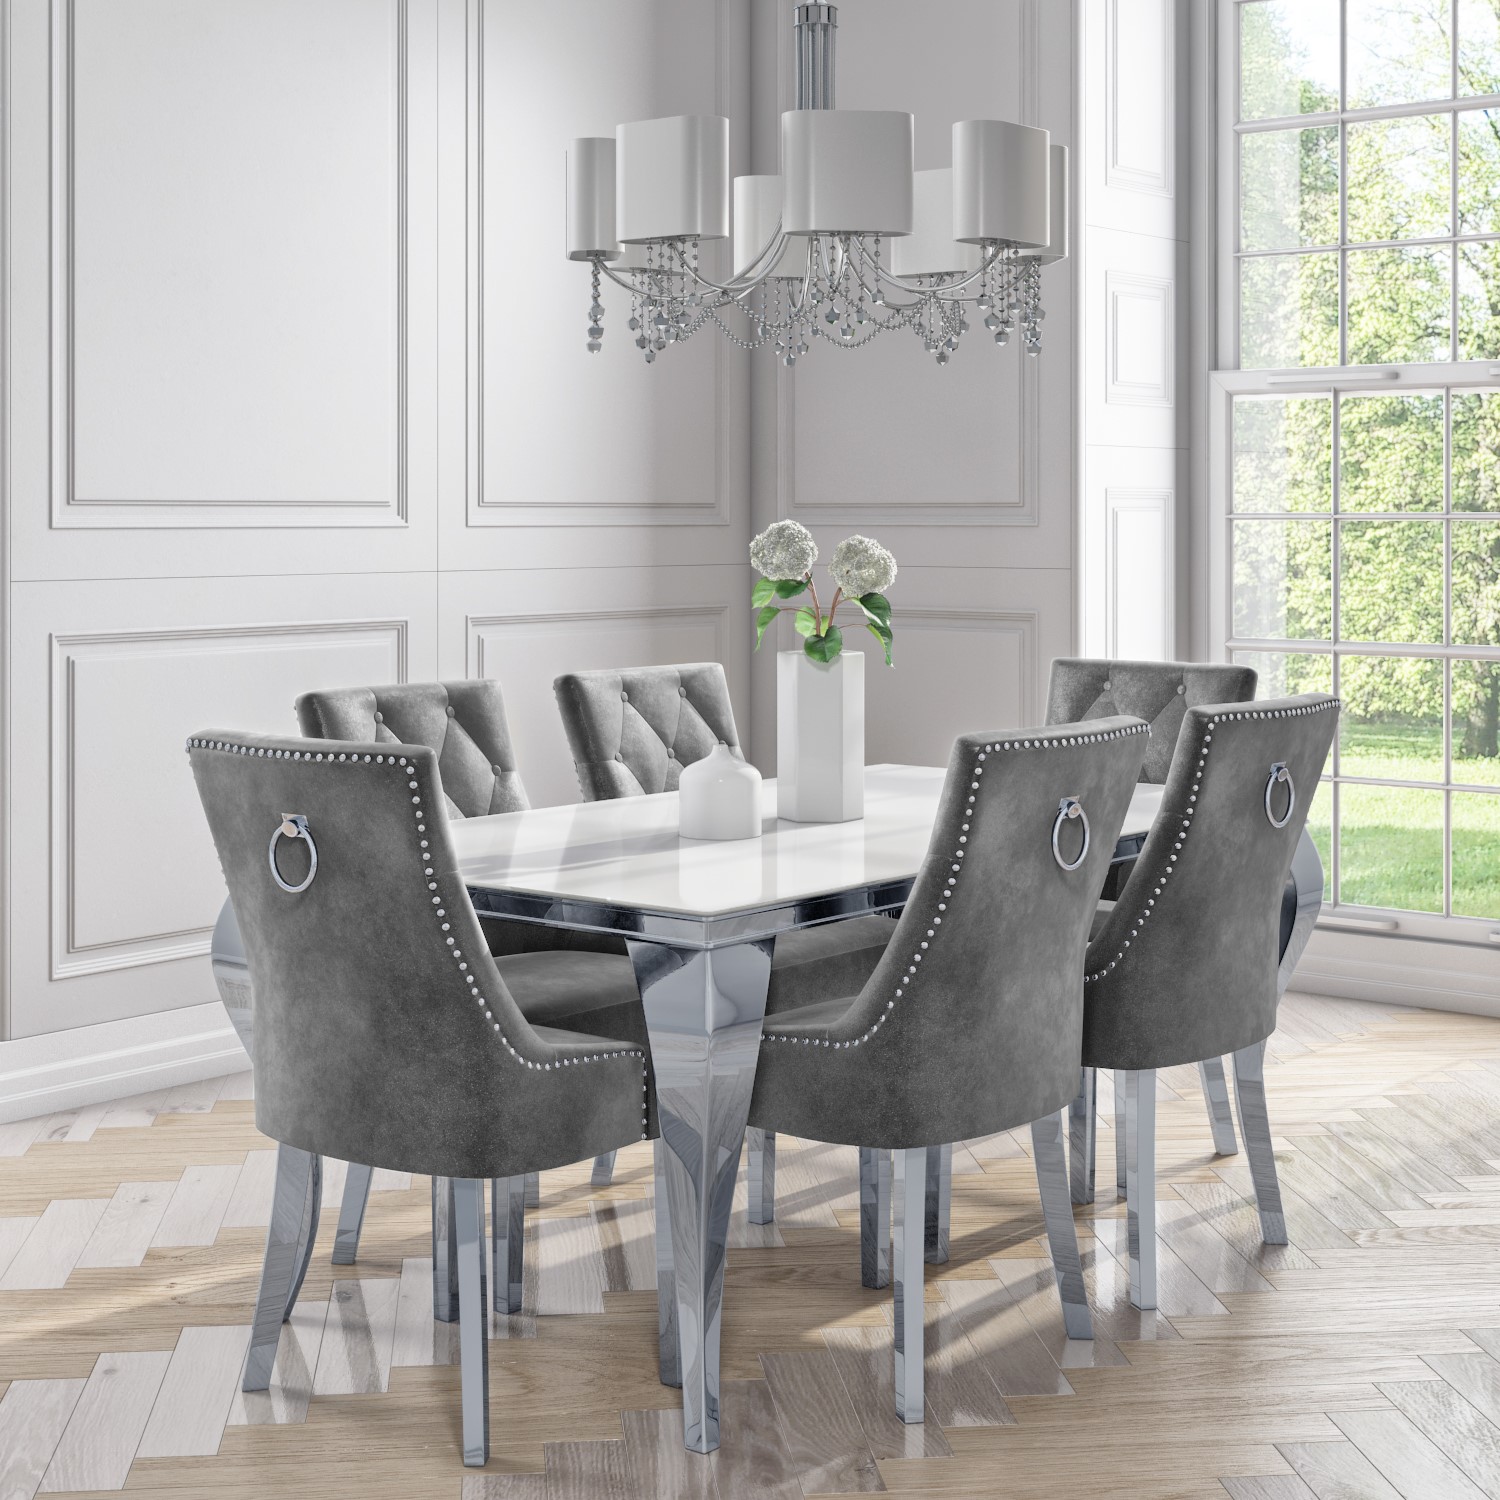 White Mirrored Dining Table With 6 Chairs In Grey Velvet Louis Furniture123